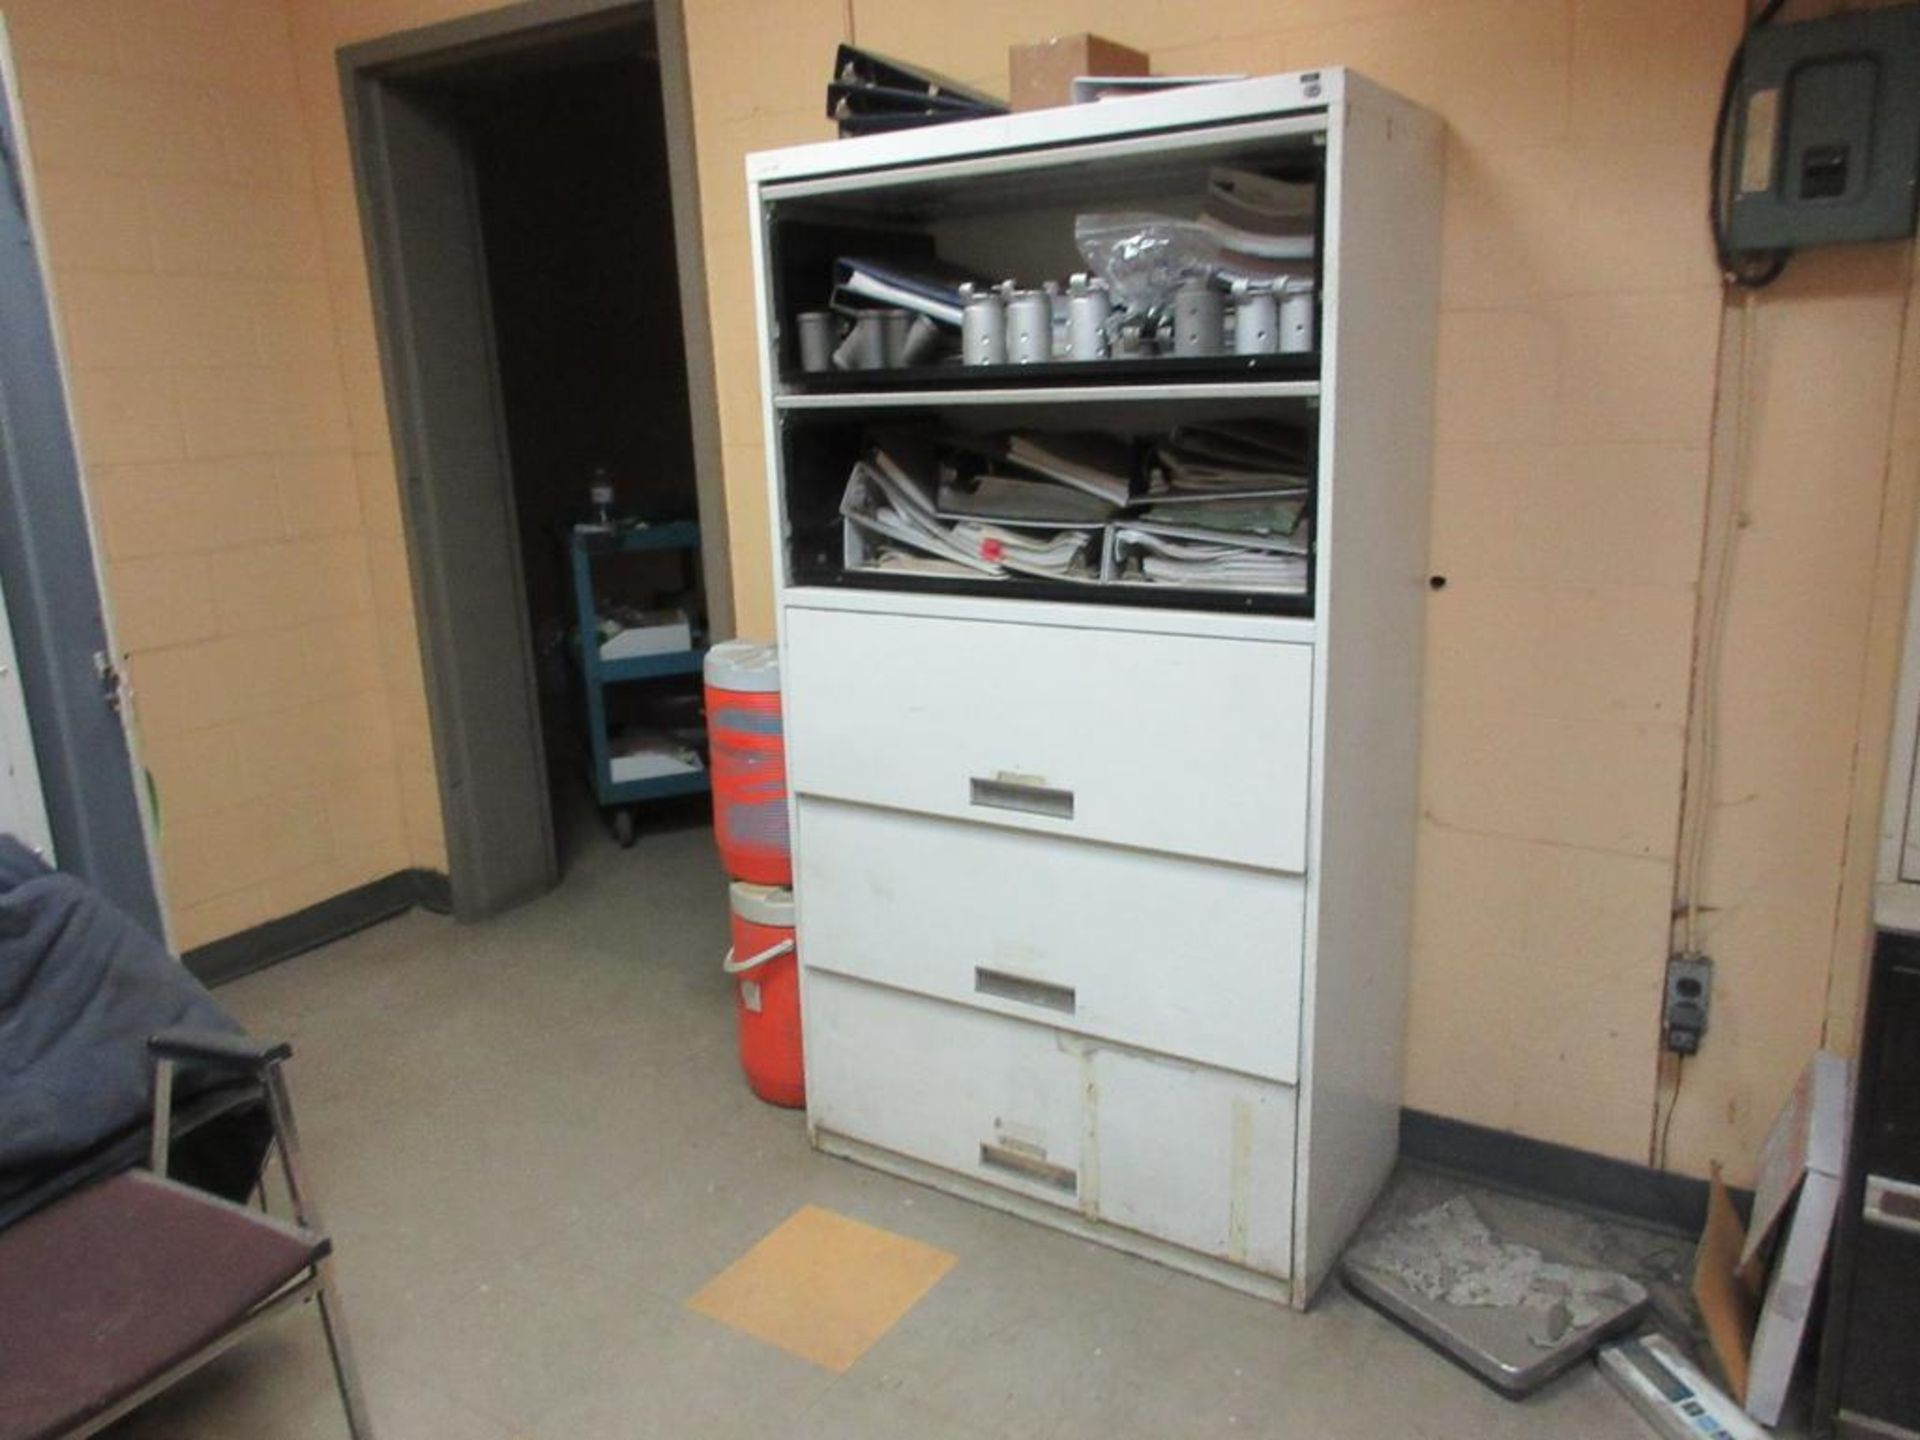 CONTENTS OF 1 OFFICE INCL 6 FILE CABINETS, 1 DESK, 3 CHAIRS, KP5100 DIGITAL SCALE (NO ELECTRONICS (O - Image 3 of 8